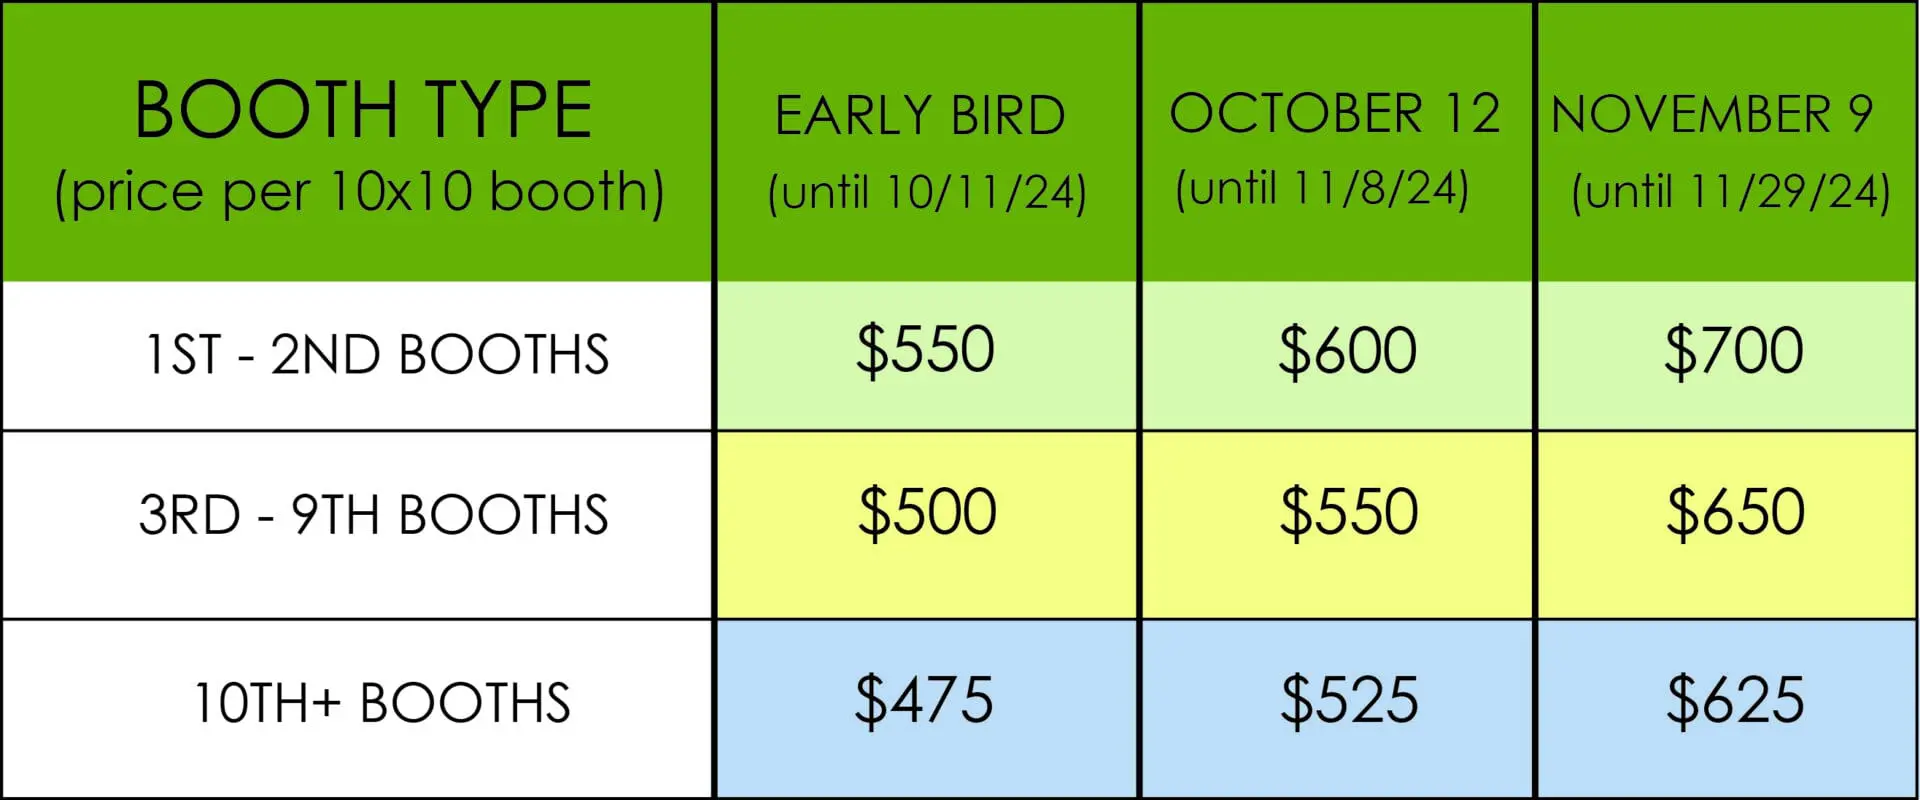 Booth Type Pricing